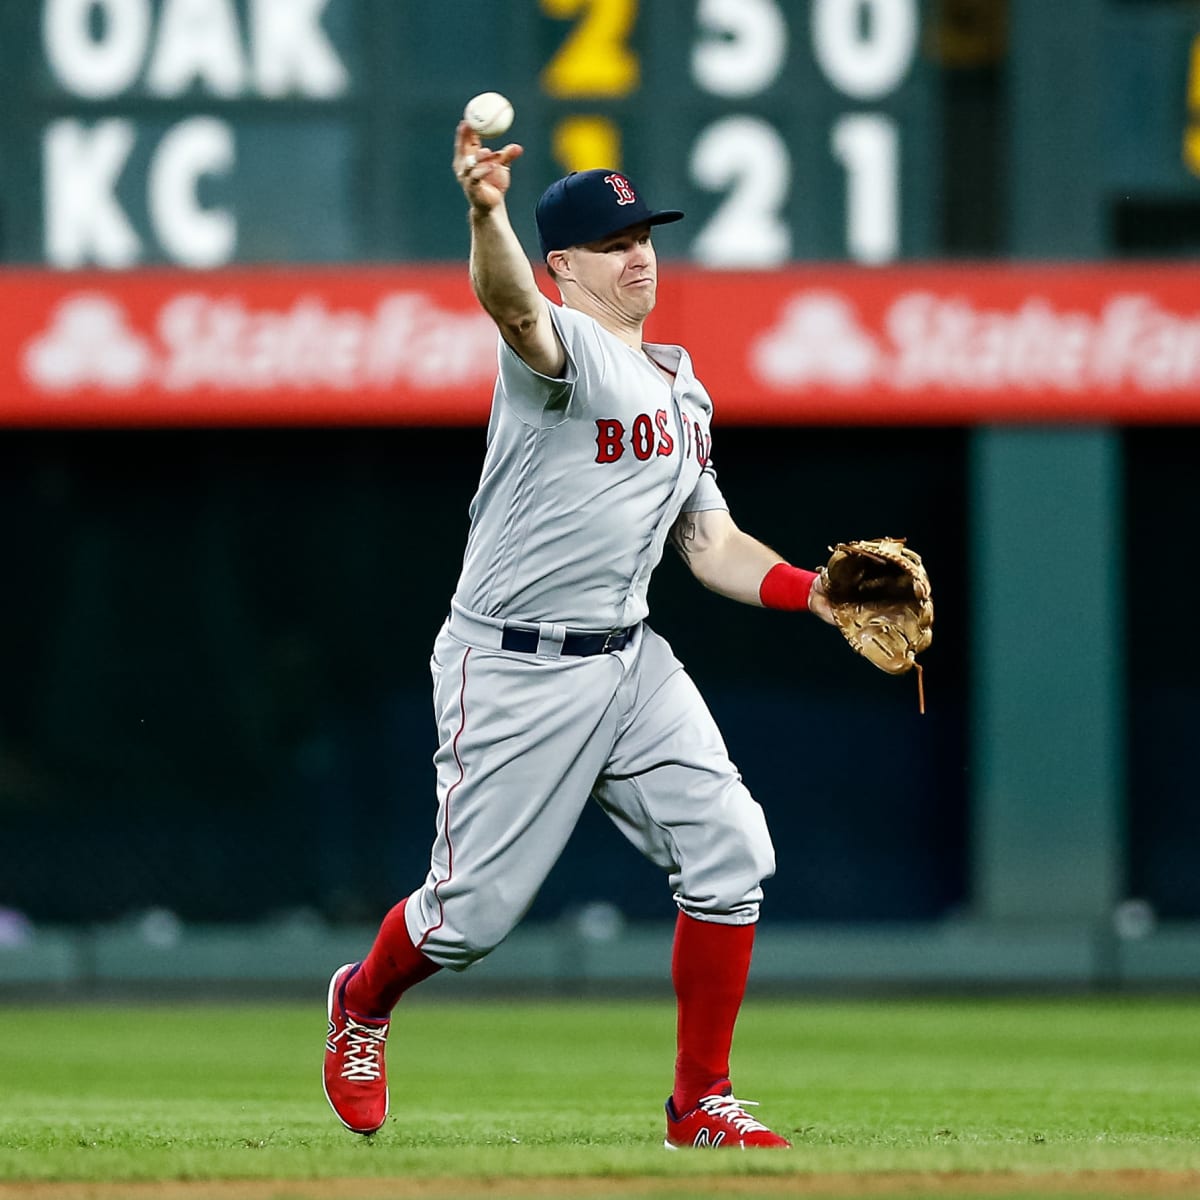 Brock Holt is the campaign manager for the #VoteBenny movement